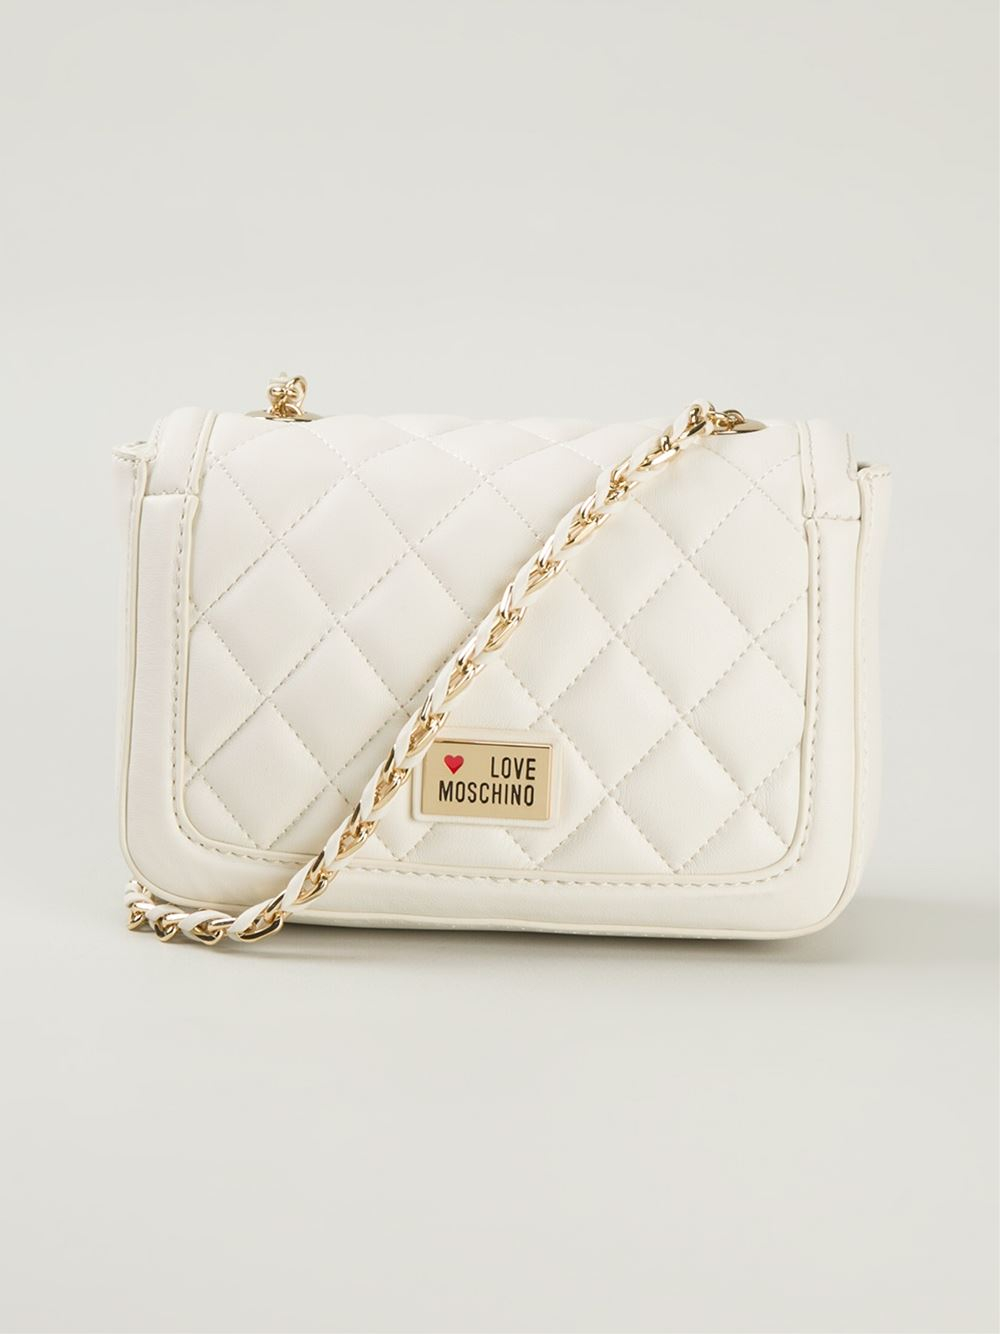 Love Moschino Quilted-Leather Cross-Body Bag in White - Lyst